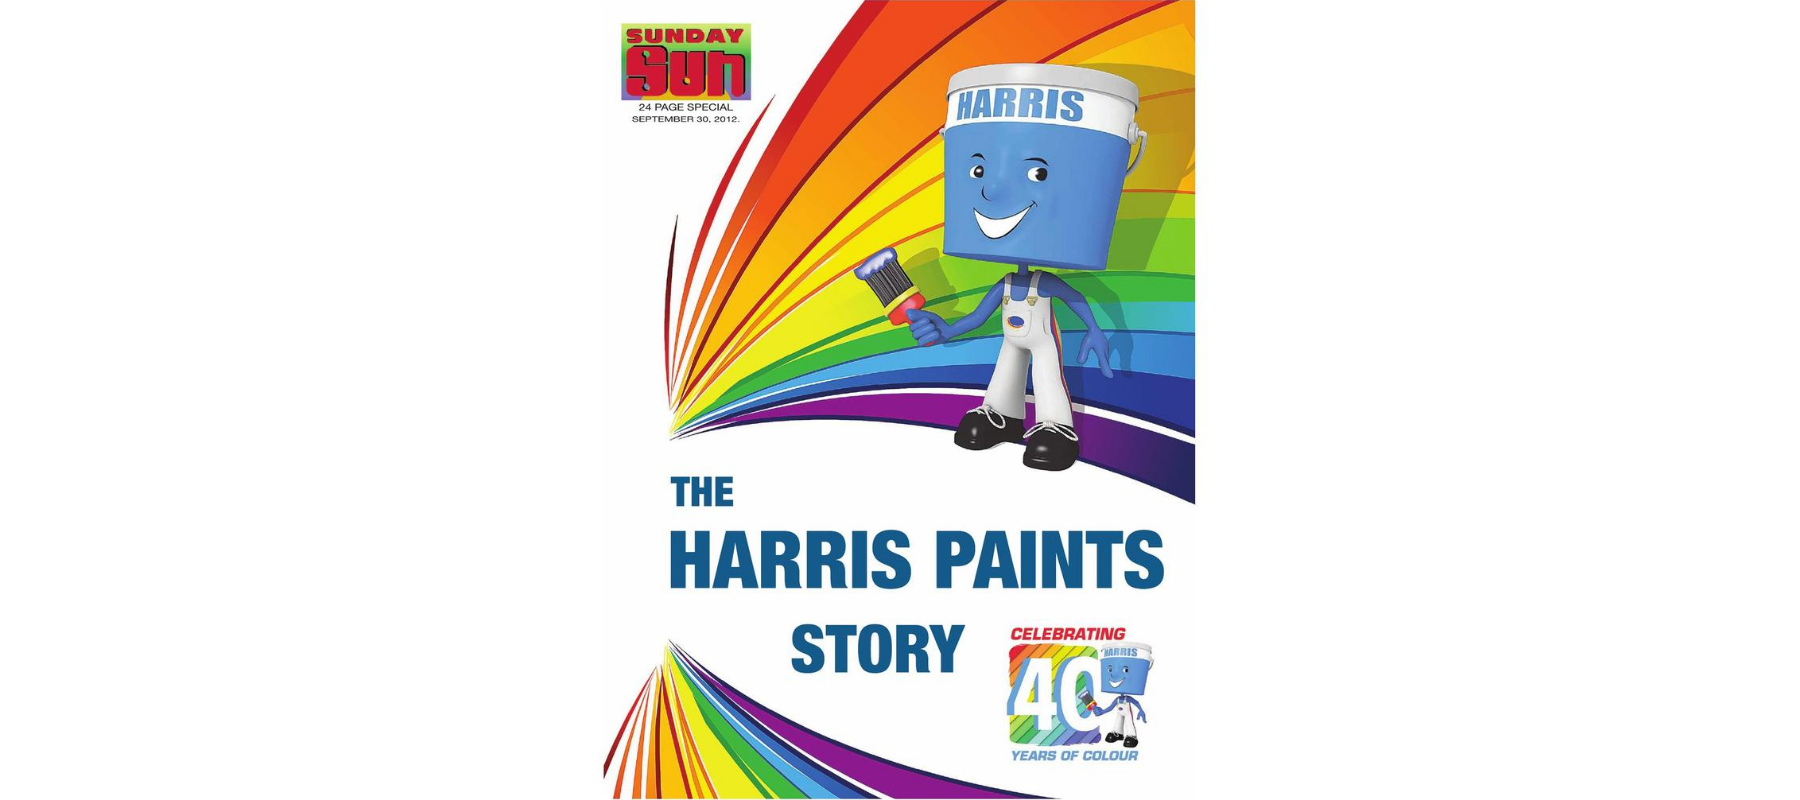 Harris Paints seeking to build on its 40 years